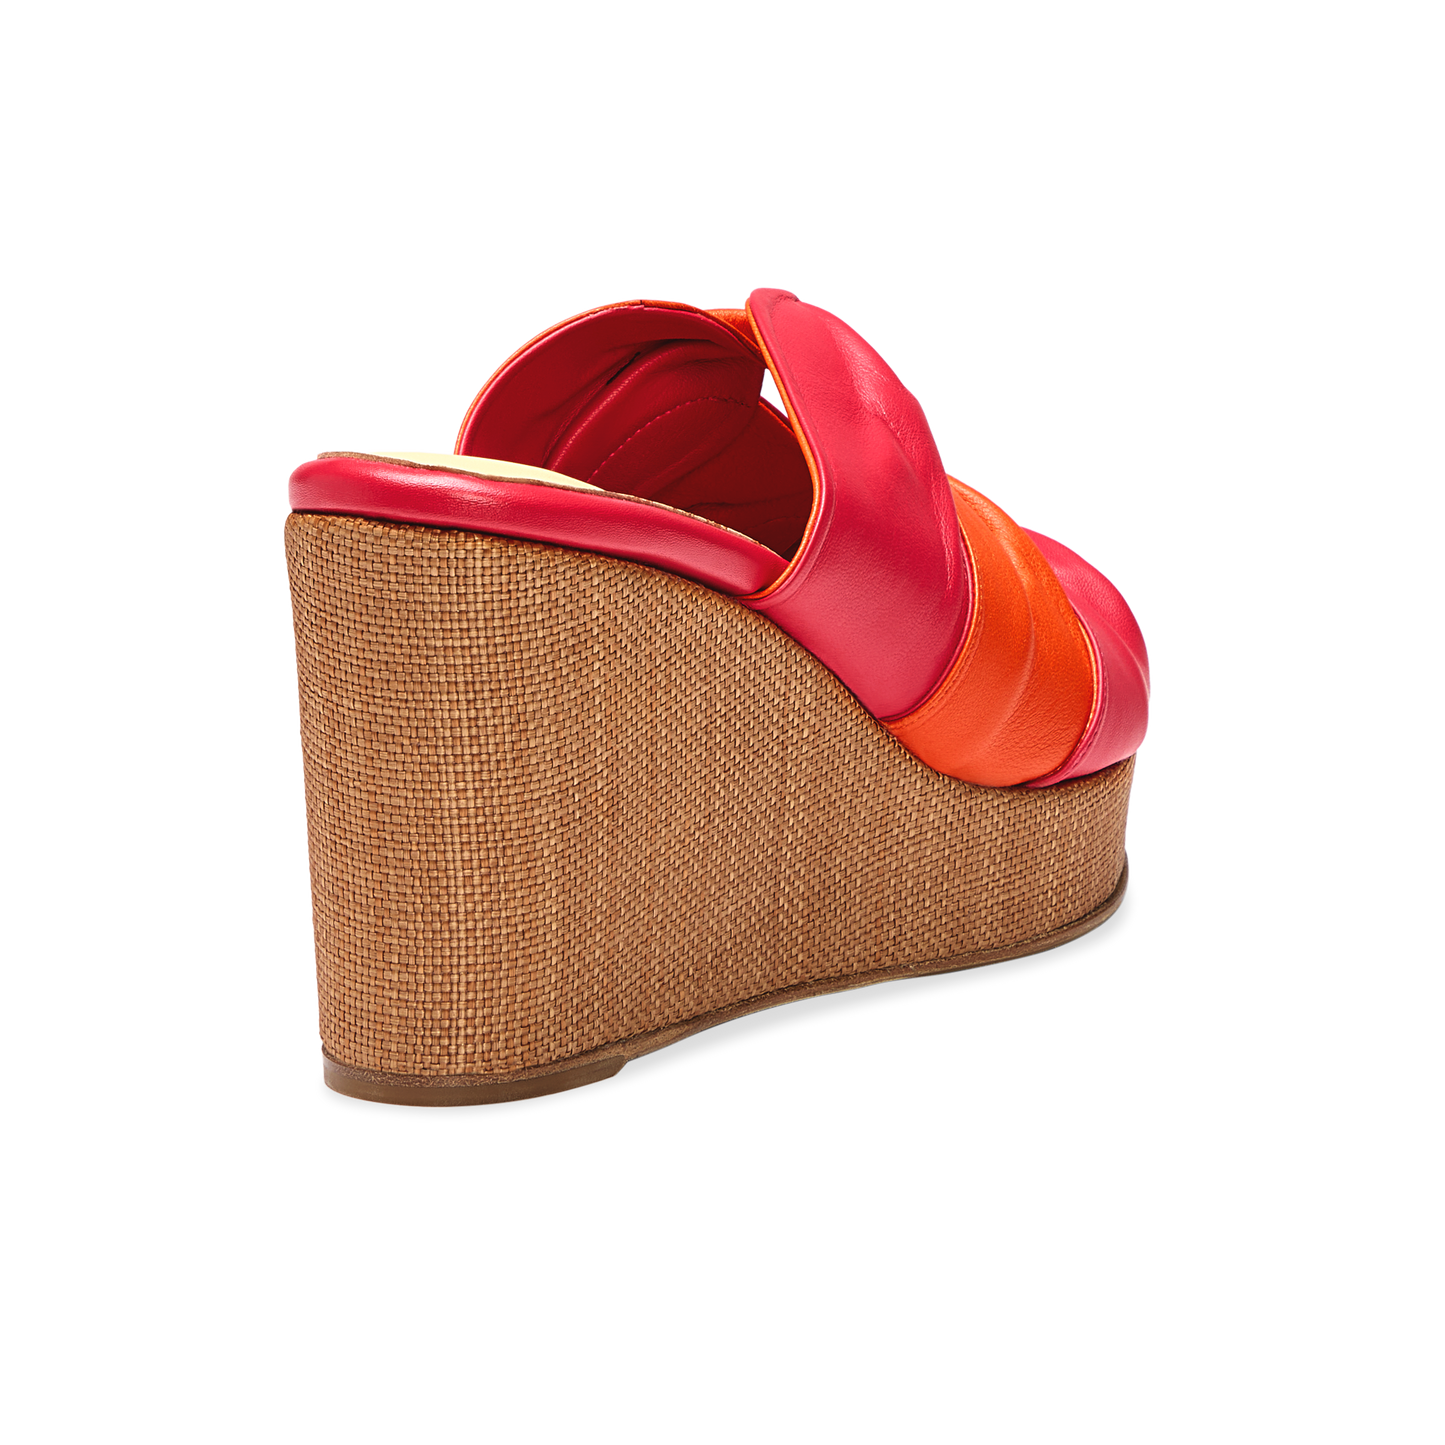 Perfect Arabesque Wedge 80 in Positano Pink Nappa & Woven Wedge